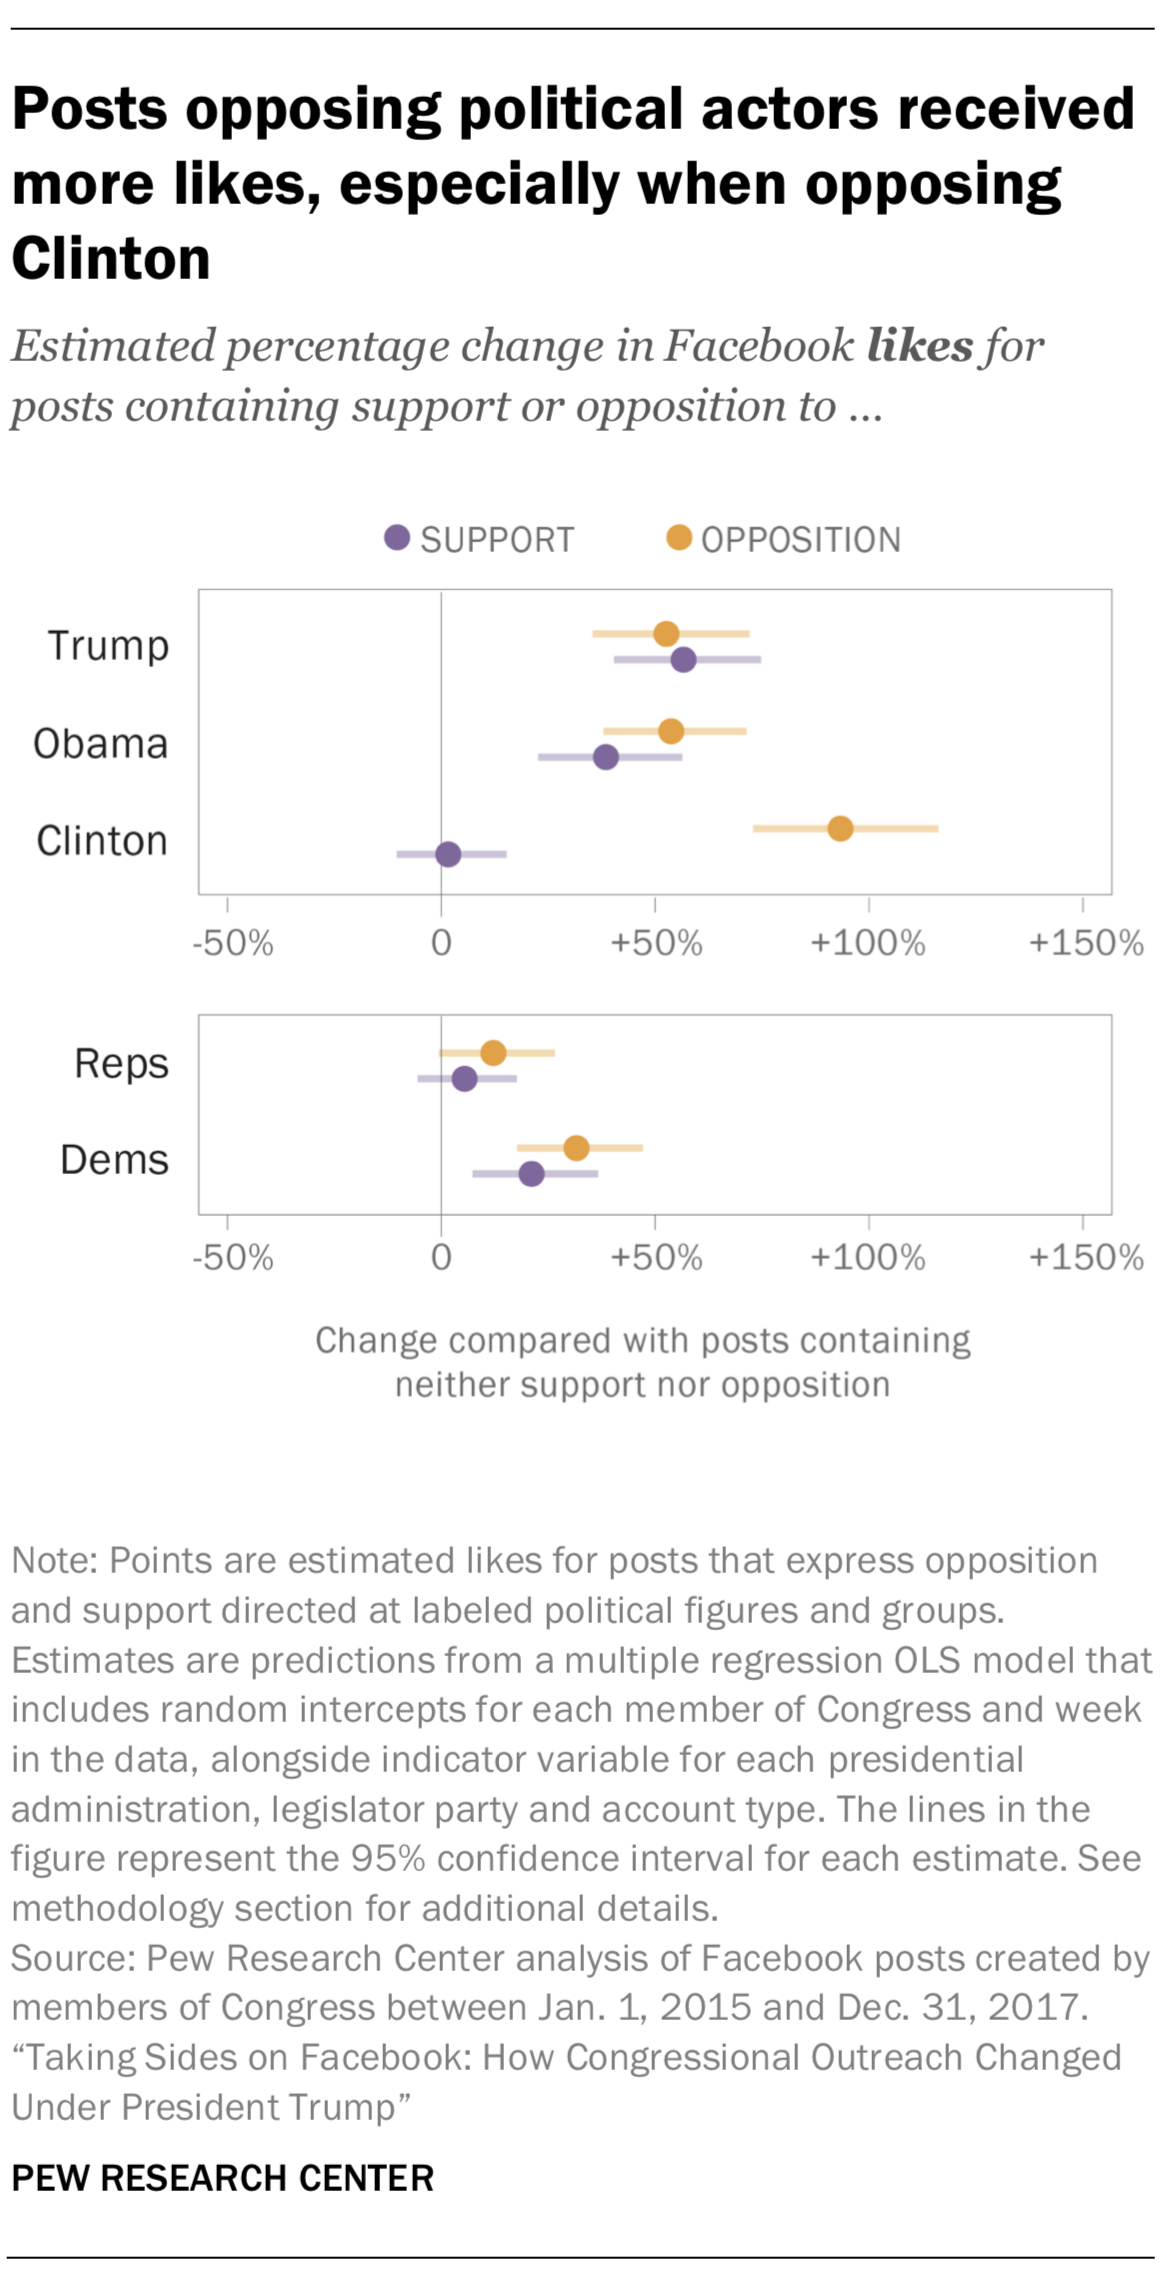 Posts opposing political actors received more likes, especially when opposing Clinton